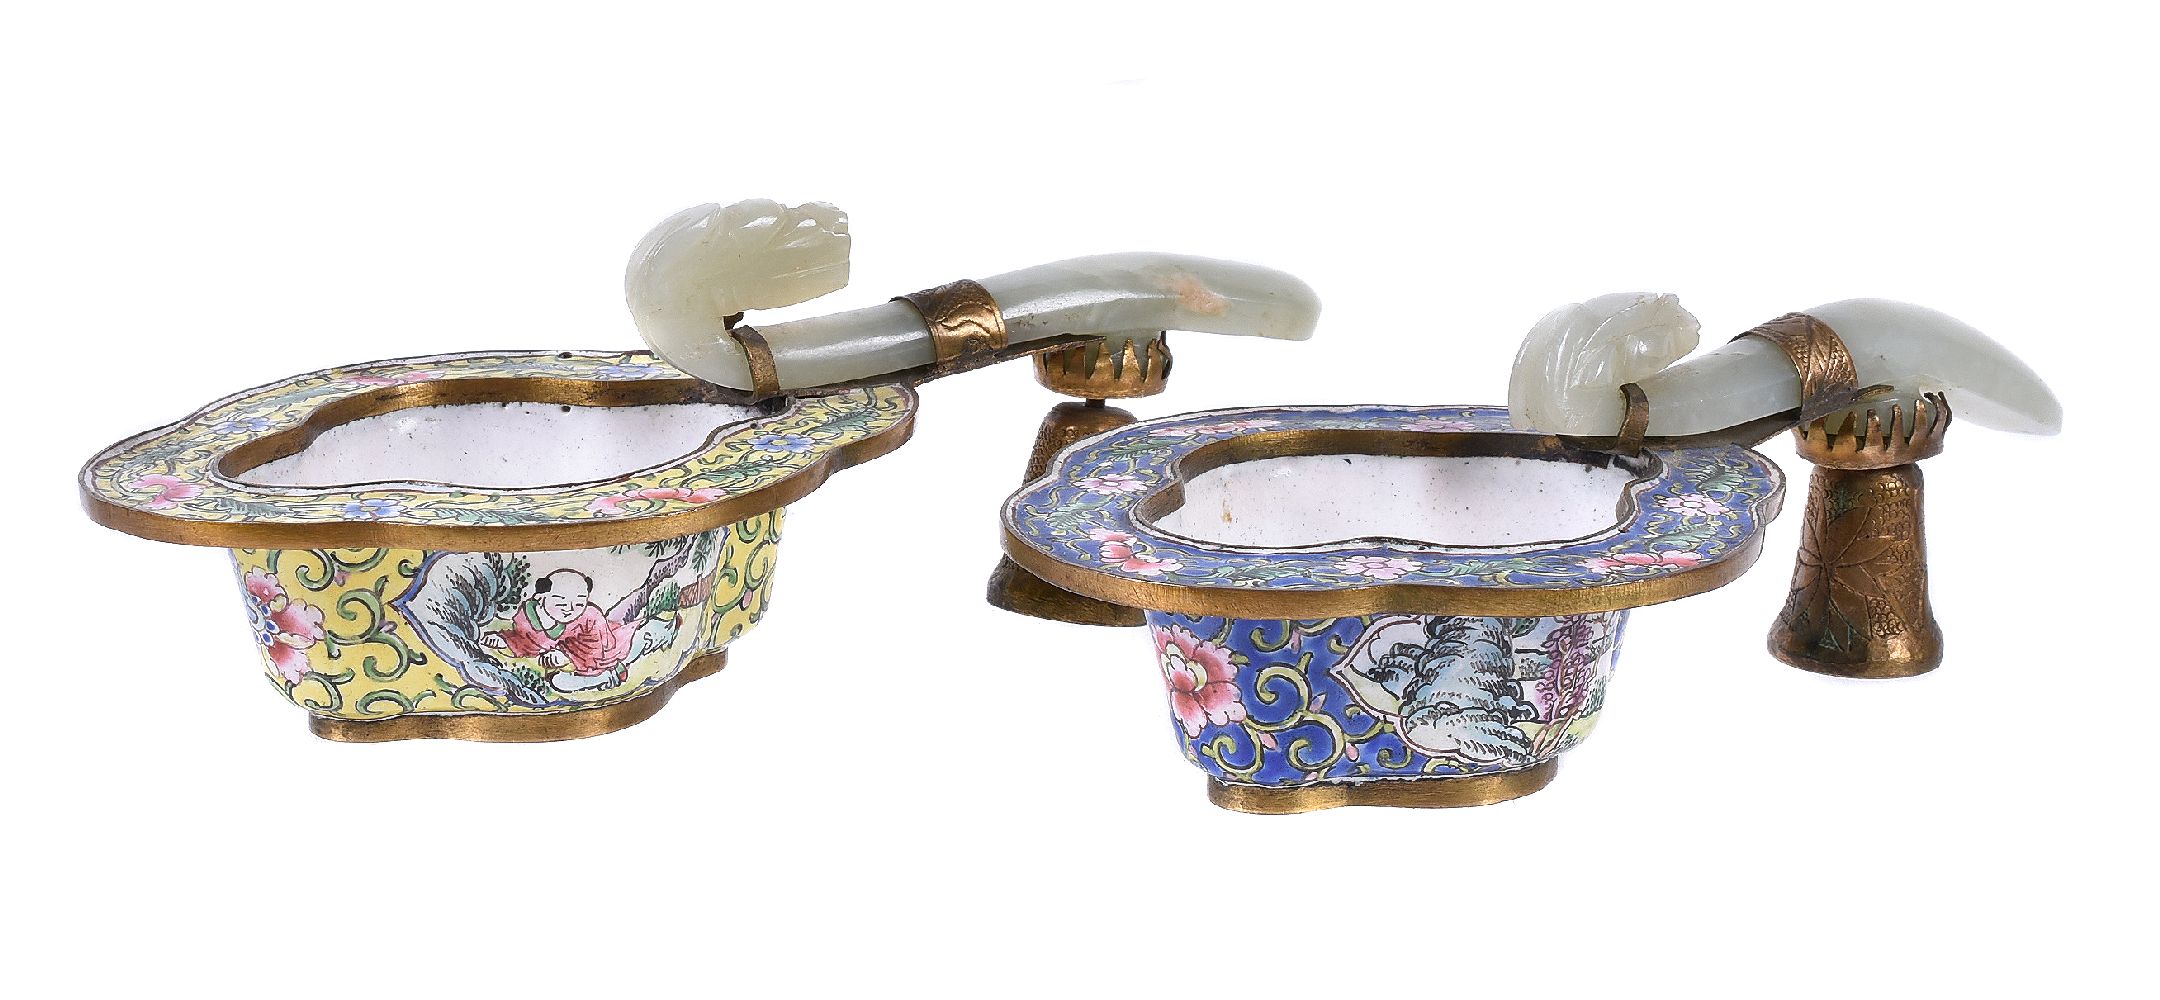 A pair of Chinese enamel jade and gilt-metal mounted cups - Image 4 of 5